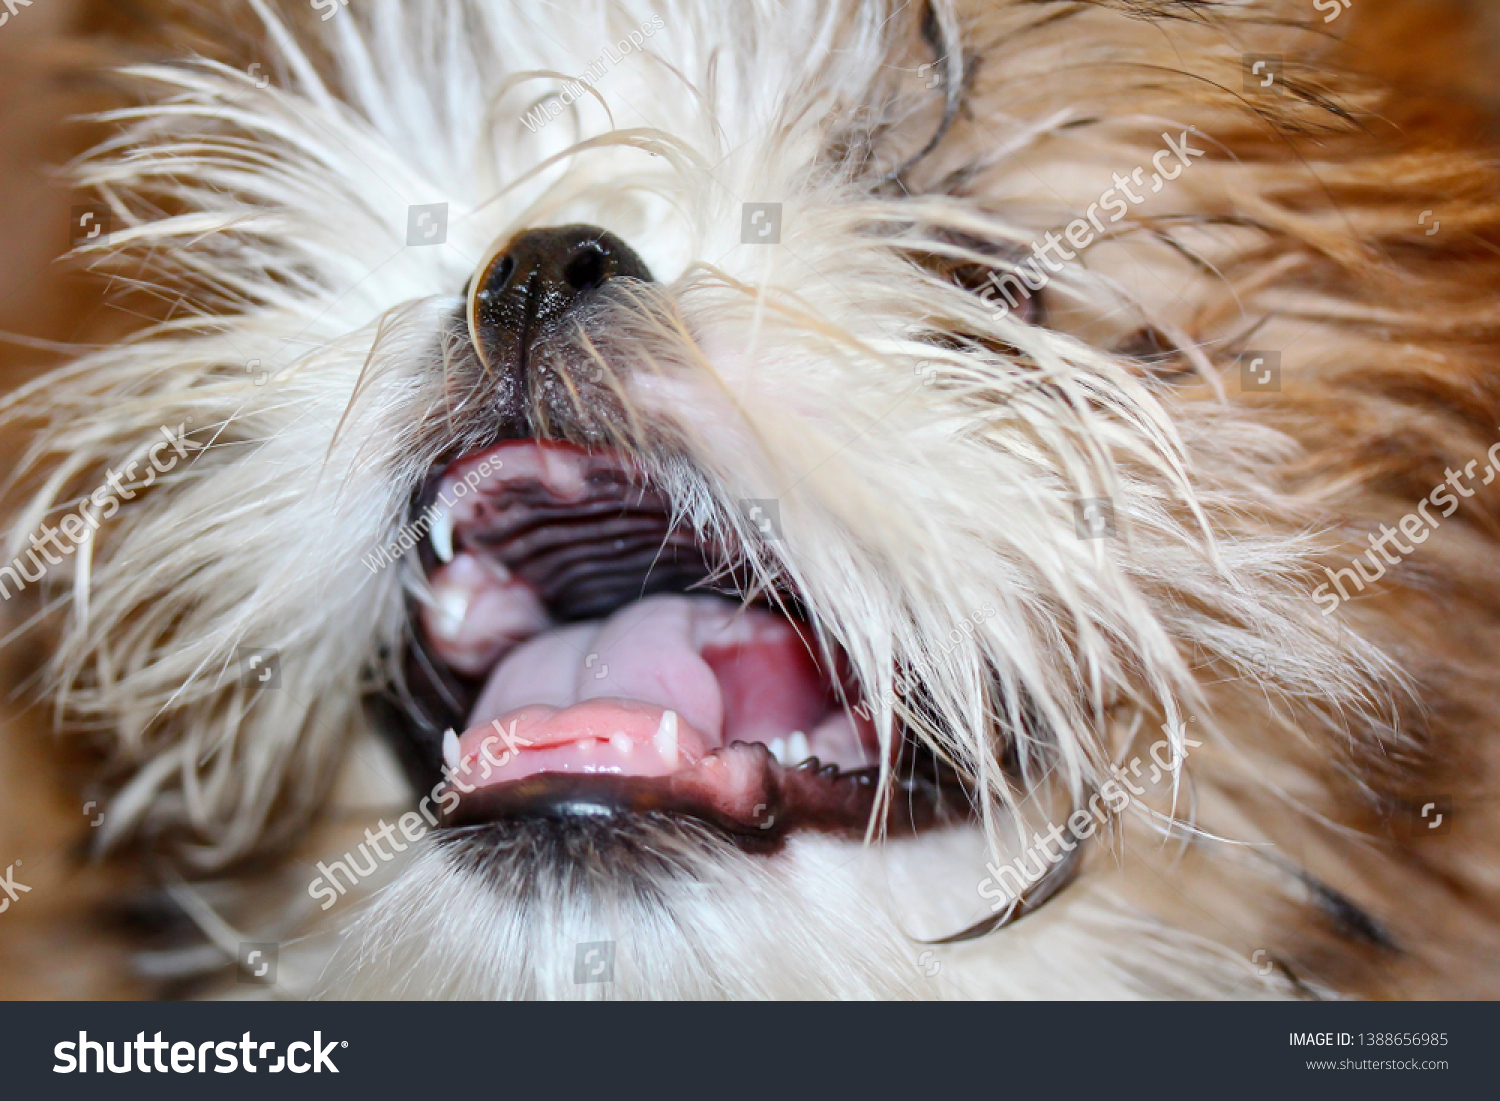 Happy Shih Tzu Puppy Open Mouth Stock Photo Edit Now 1388656985